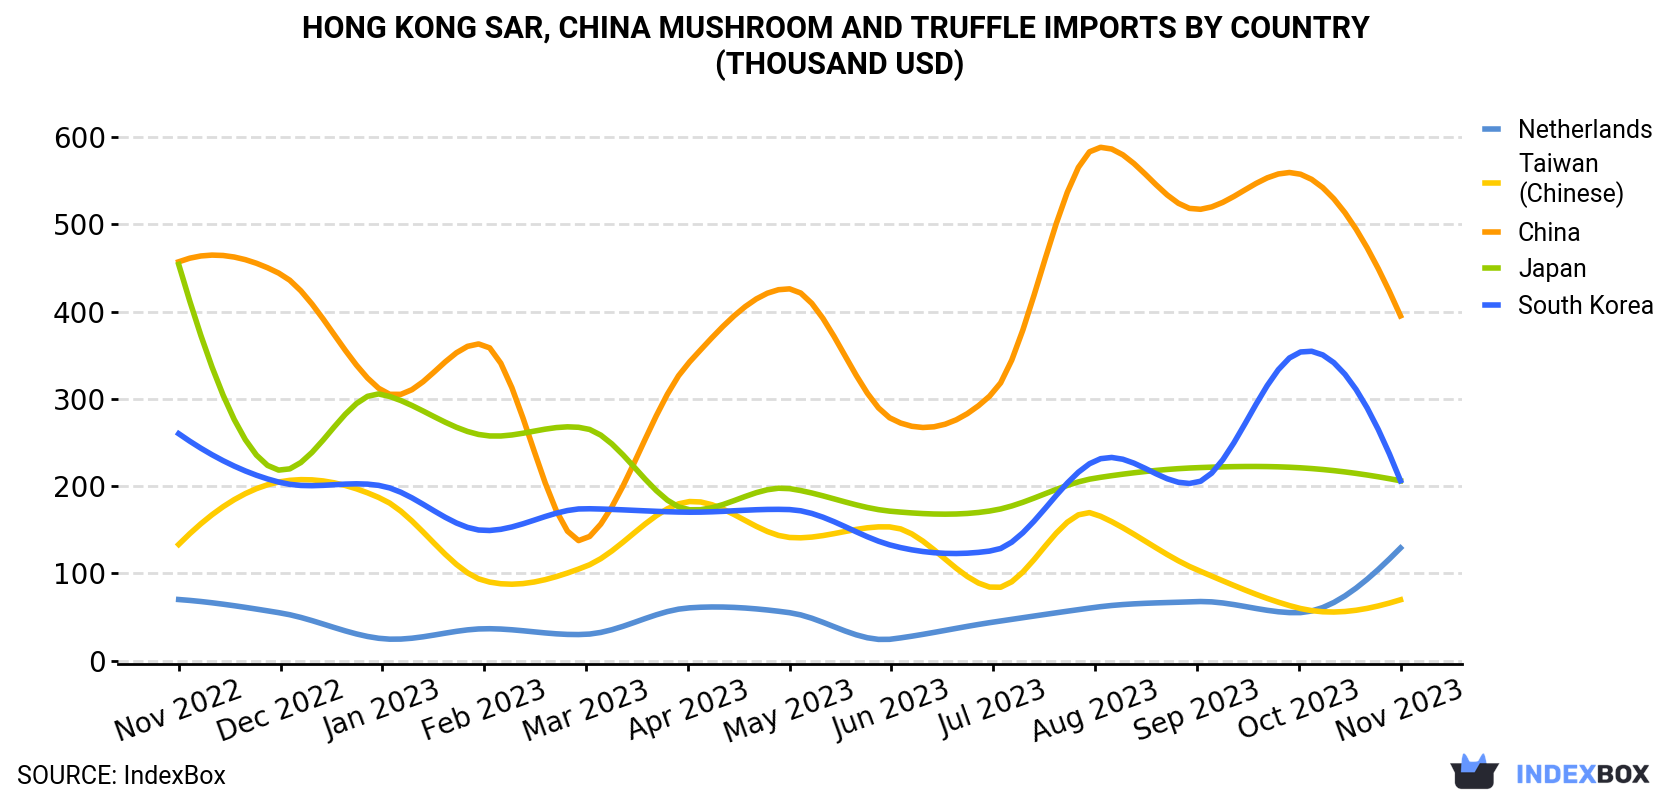 Hong Kong Mushroom And Truffle Imports By Country (Thousand USD)